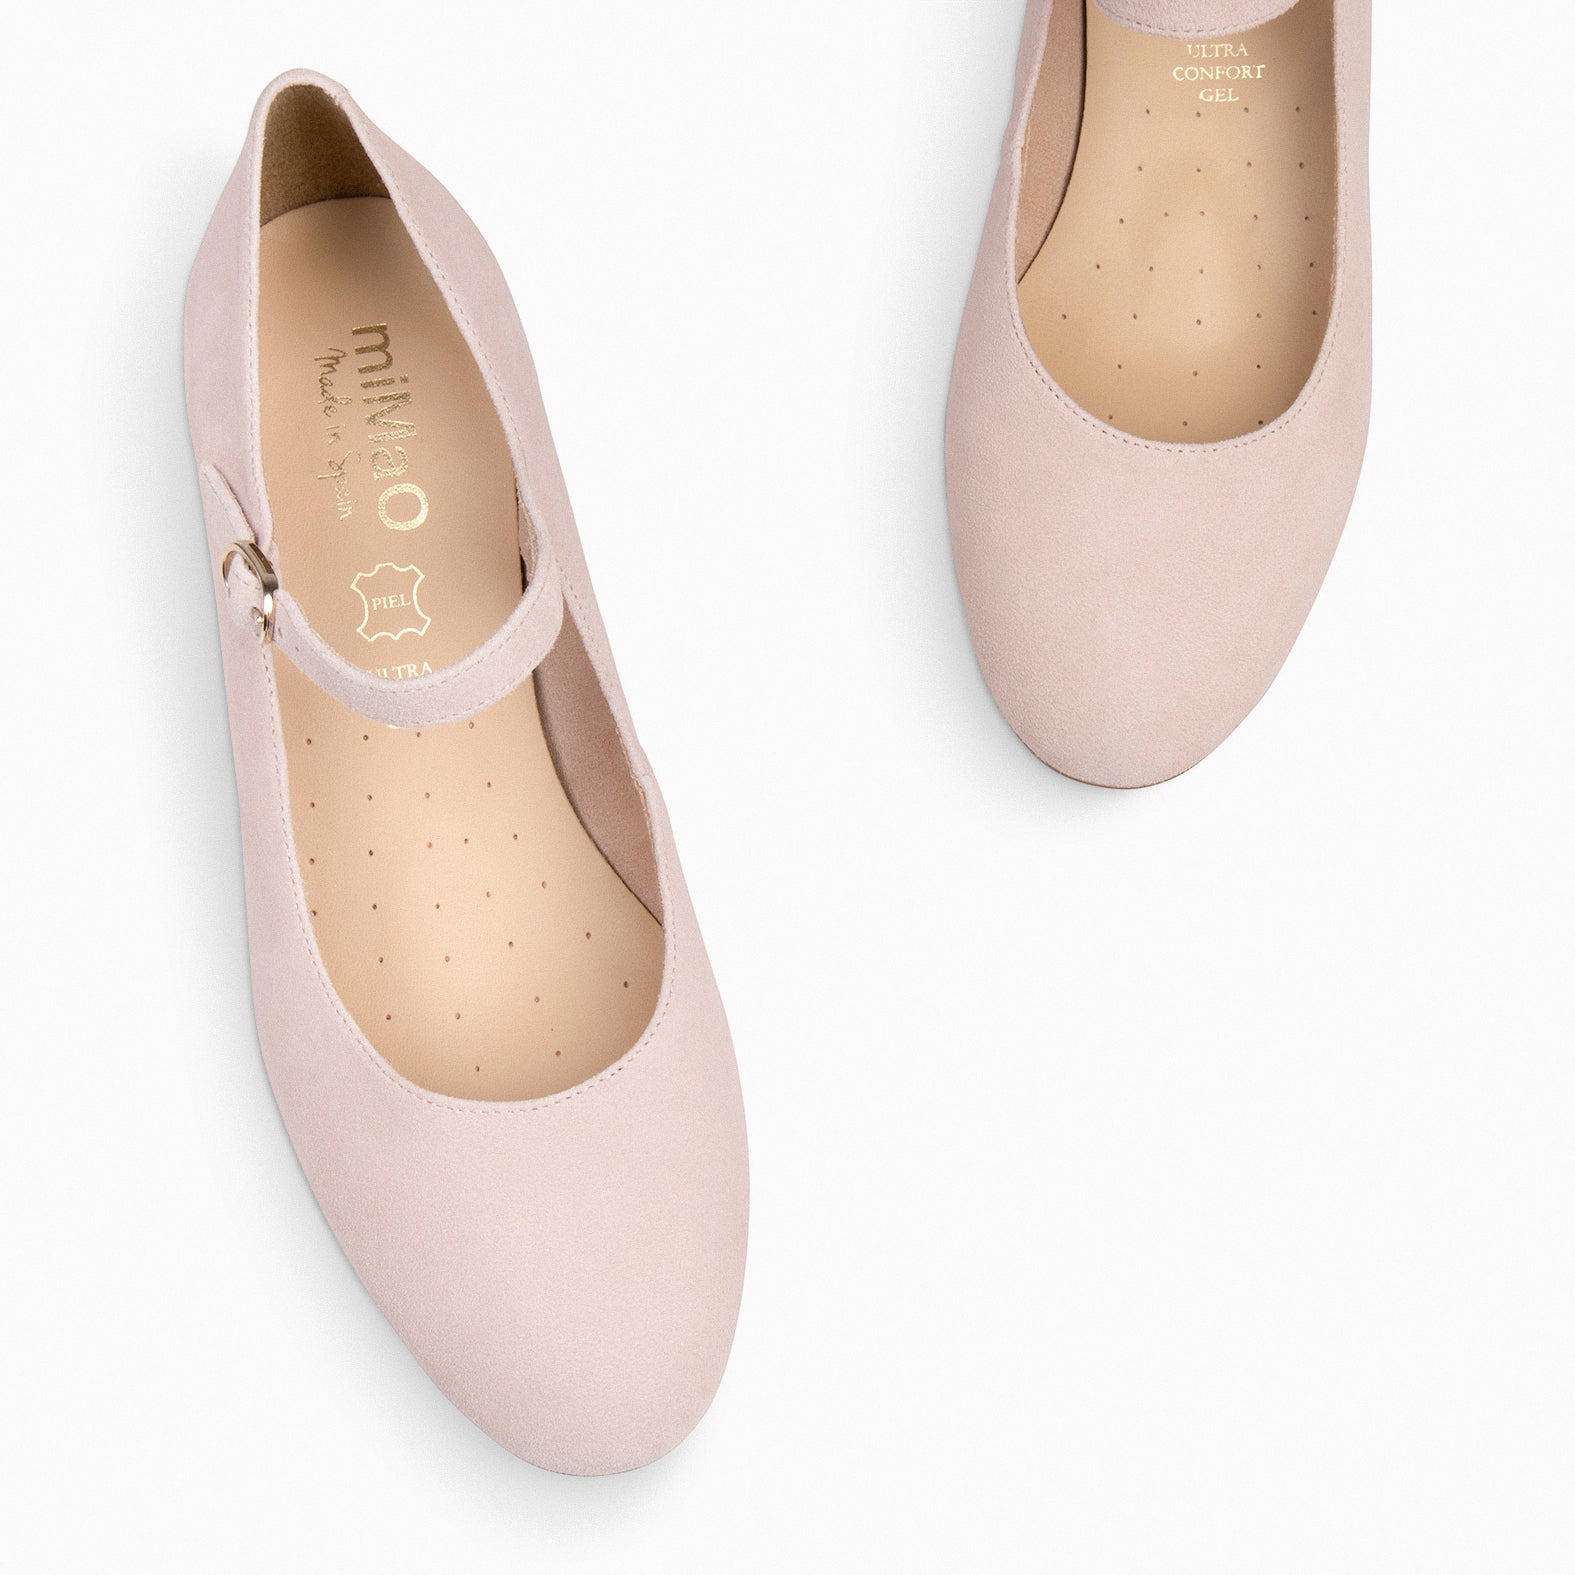 NORA – NUDE Mary-Janes with low heel 